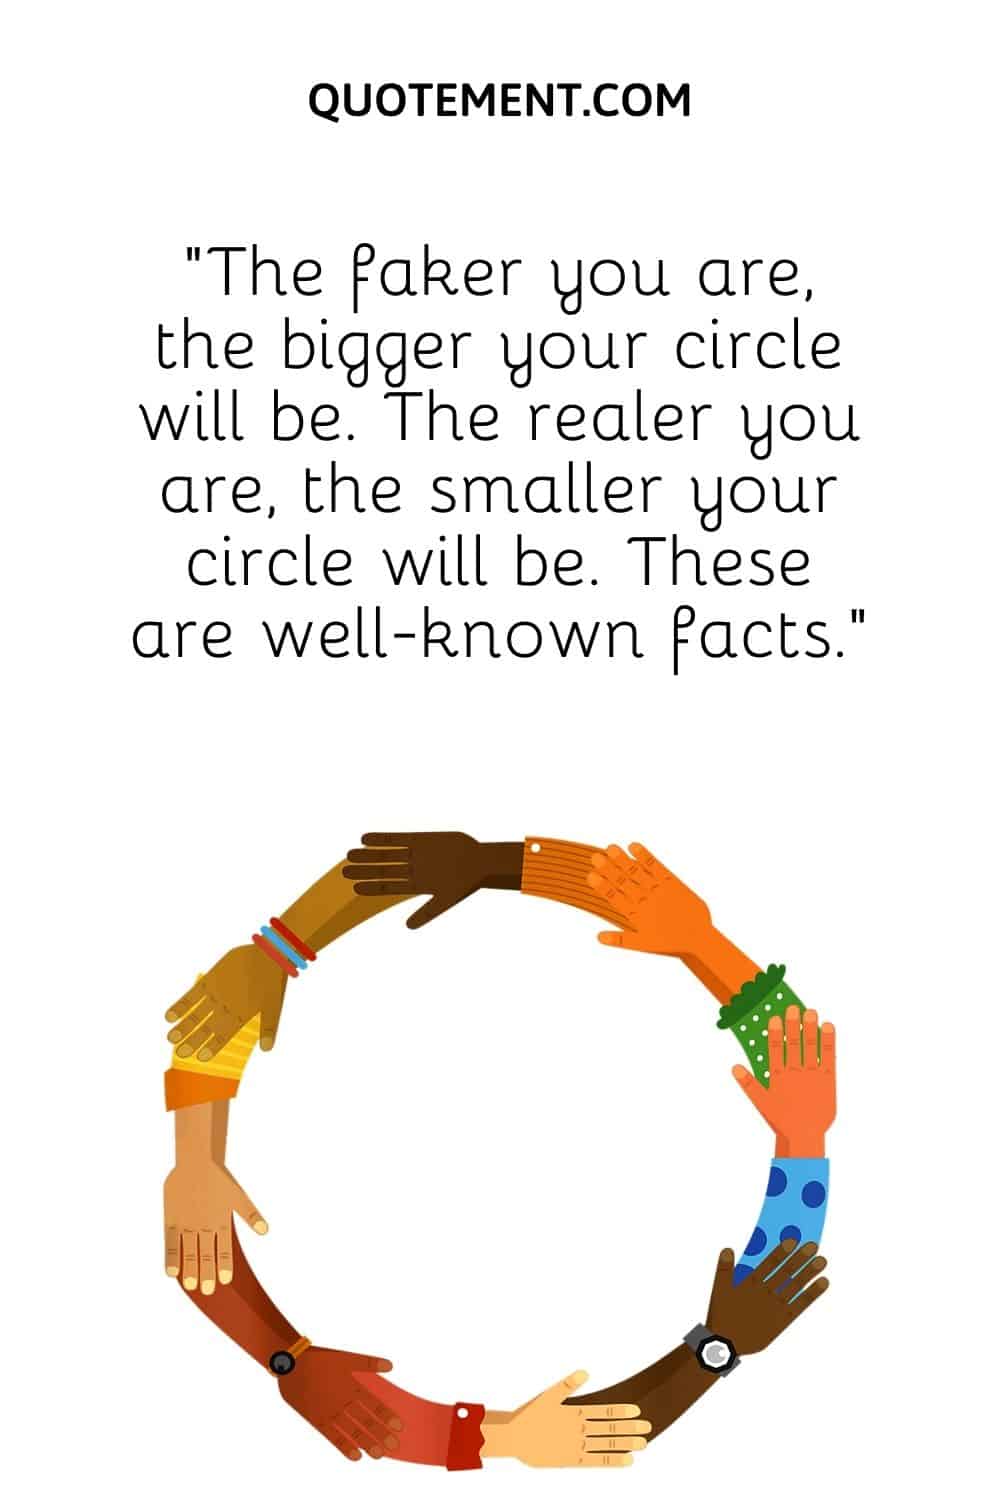 “The faker you are, the bigger your circle will be. The realer you are, the smaller your circle will be. These are well-known facts.”